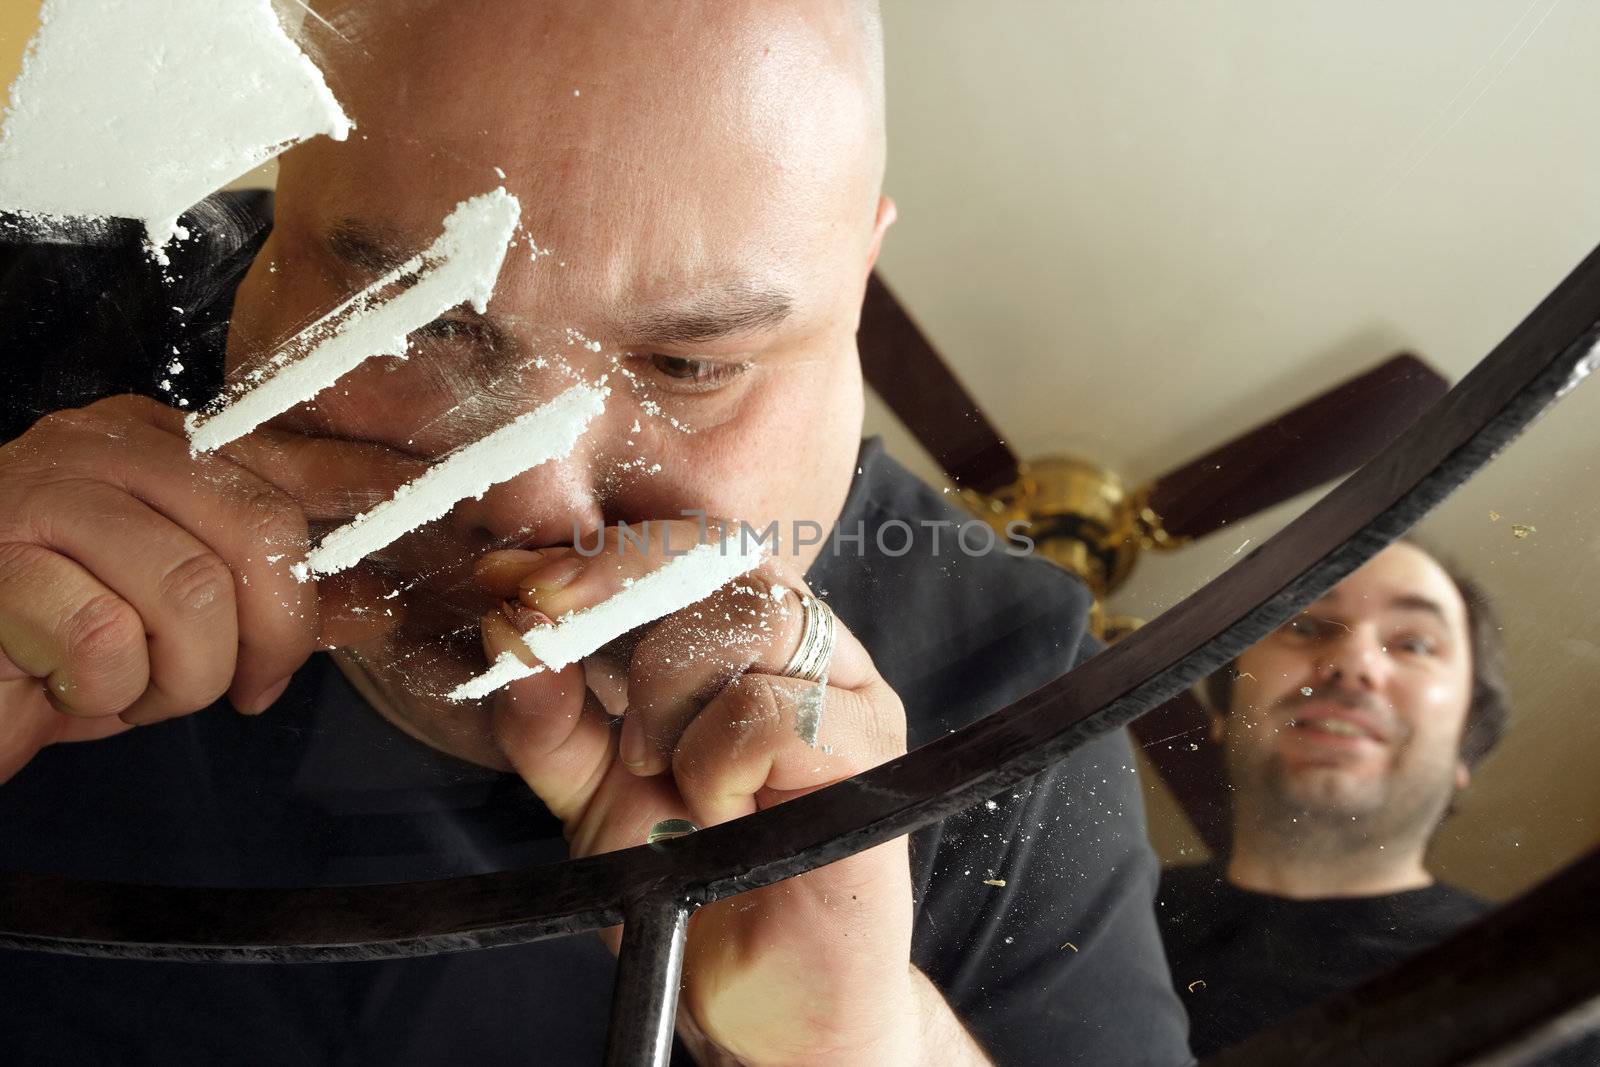 An Image of drug abuse. Male snorting lines of cocaine on a dirty glass table while another waits his turn.  View from underneath and through the glass.
